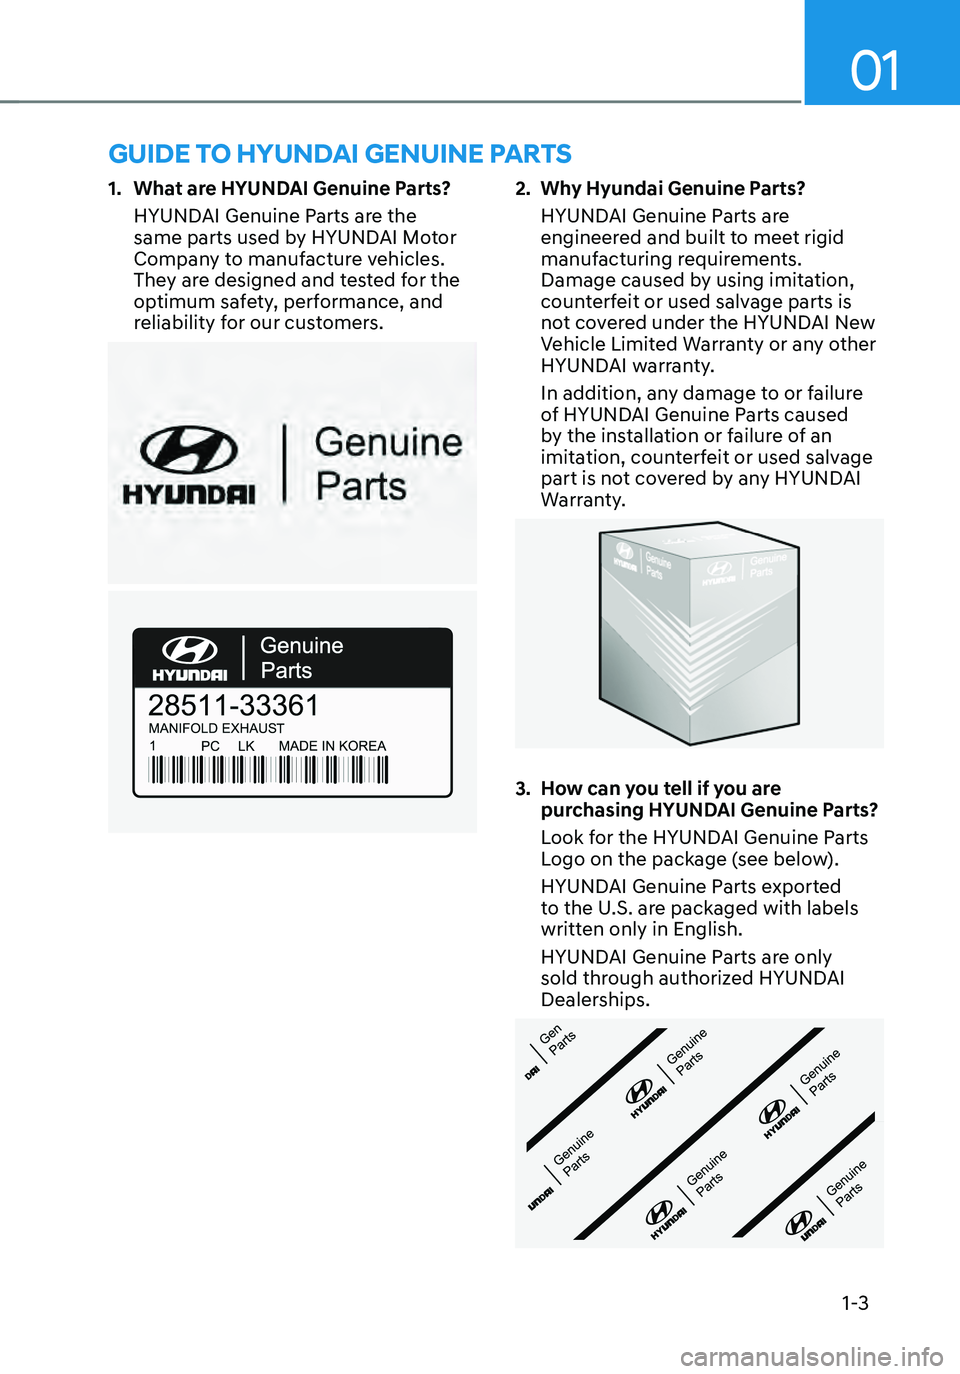 HYUNDAI TUCSON HYBRID 2021  Owners Manual 01
1-3
GUIDE TO HYUNDAI GENUINE PARTS
1. What are HYUNDAI Genuine Parts?
HYUNDAI Genuine Parts are the 
same parts used by HYUNDAI Motor 
Company to manufacture vehicles. 
They are designed and tested